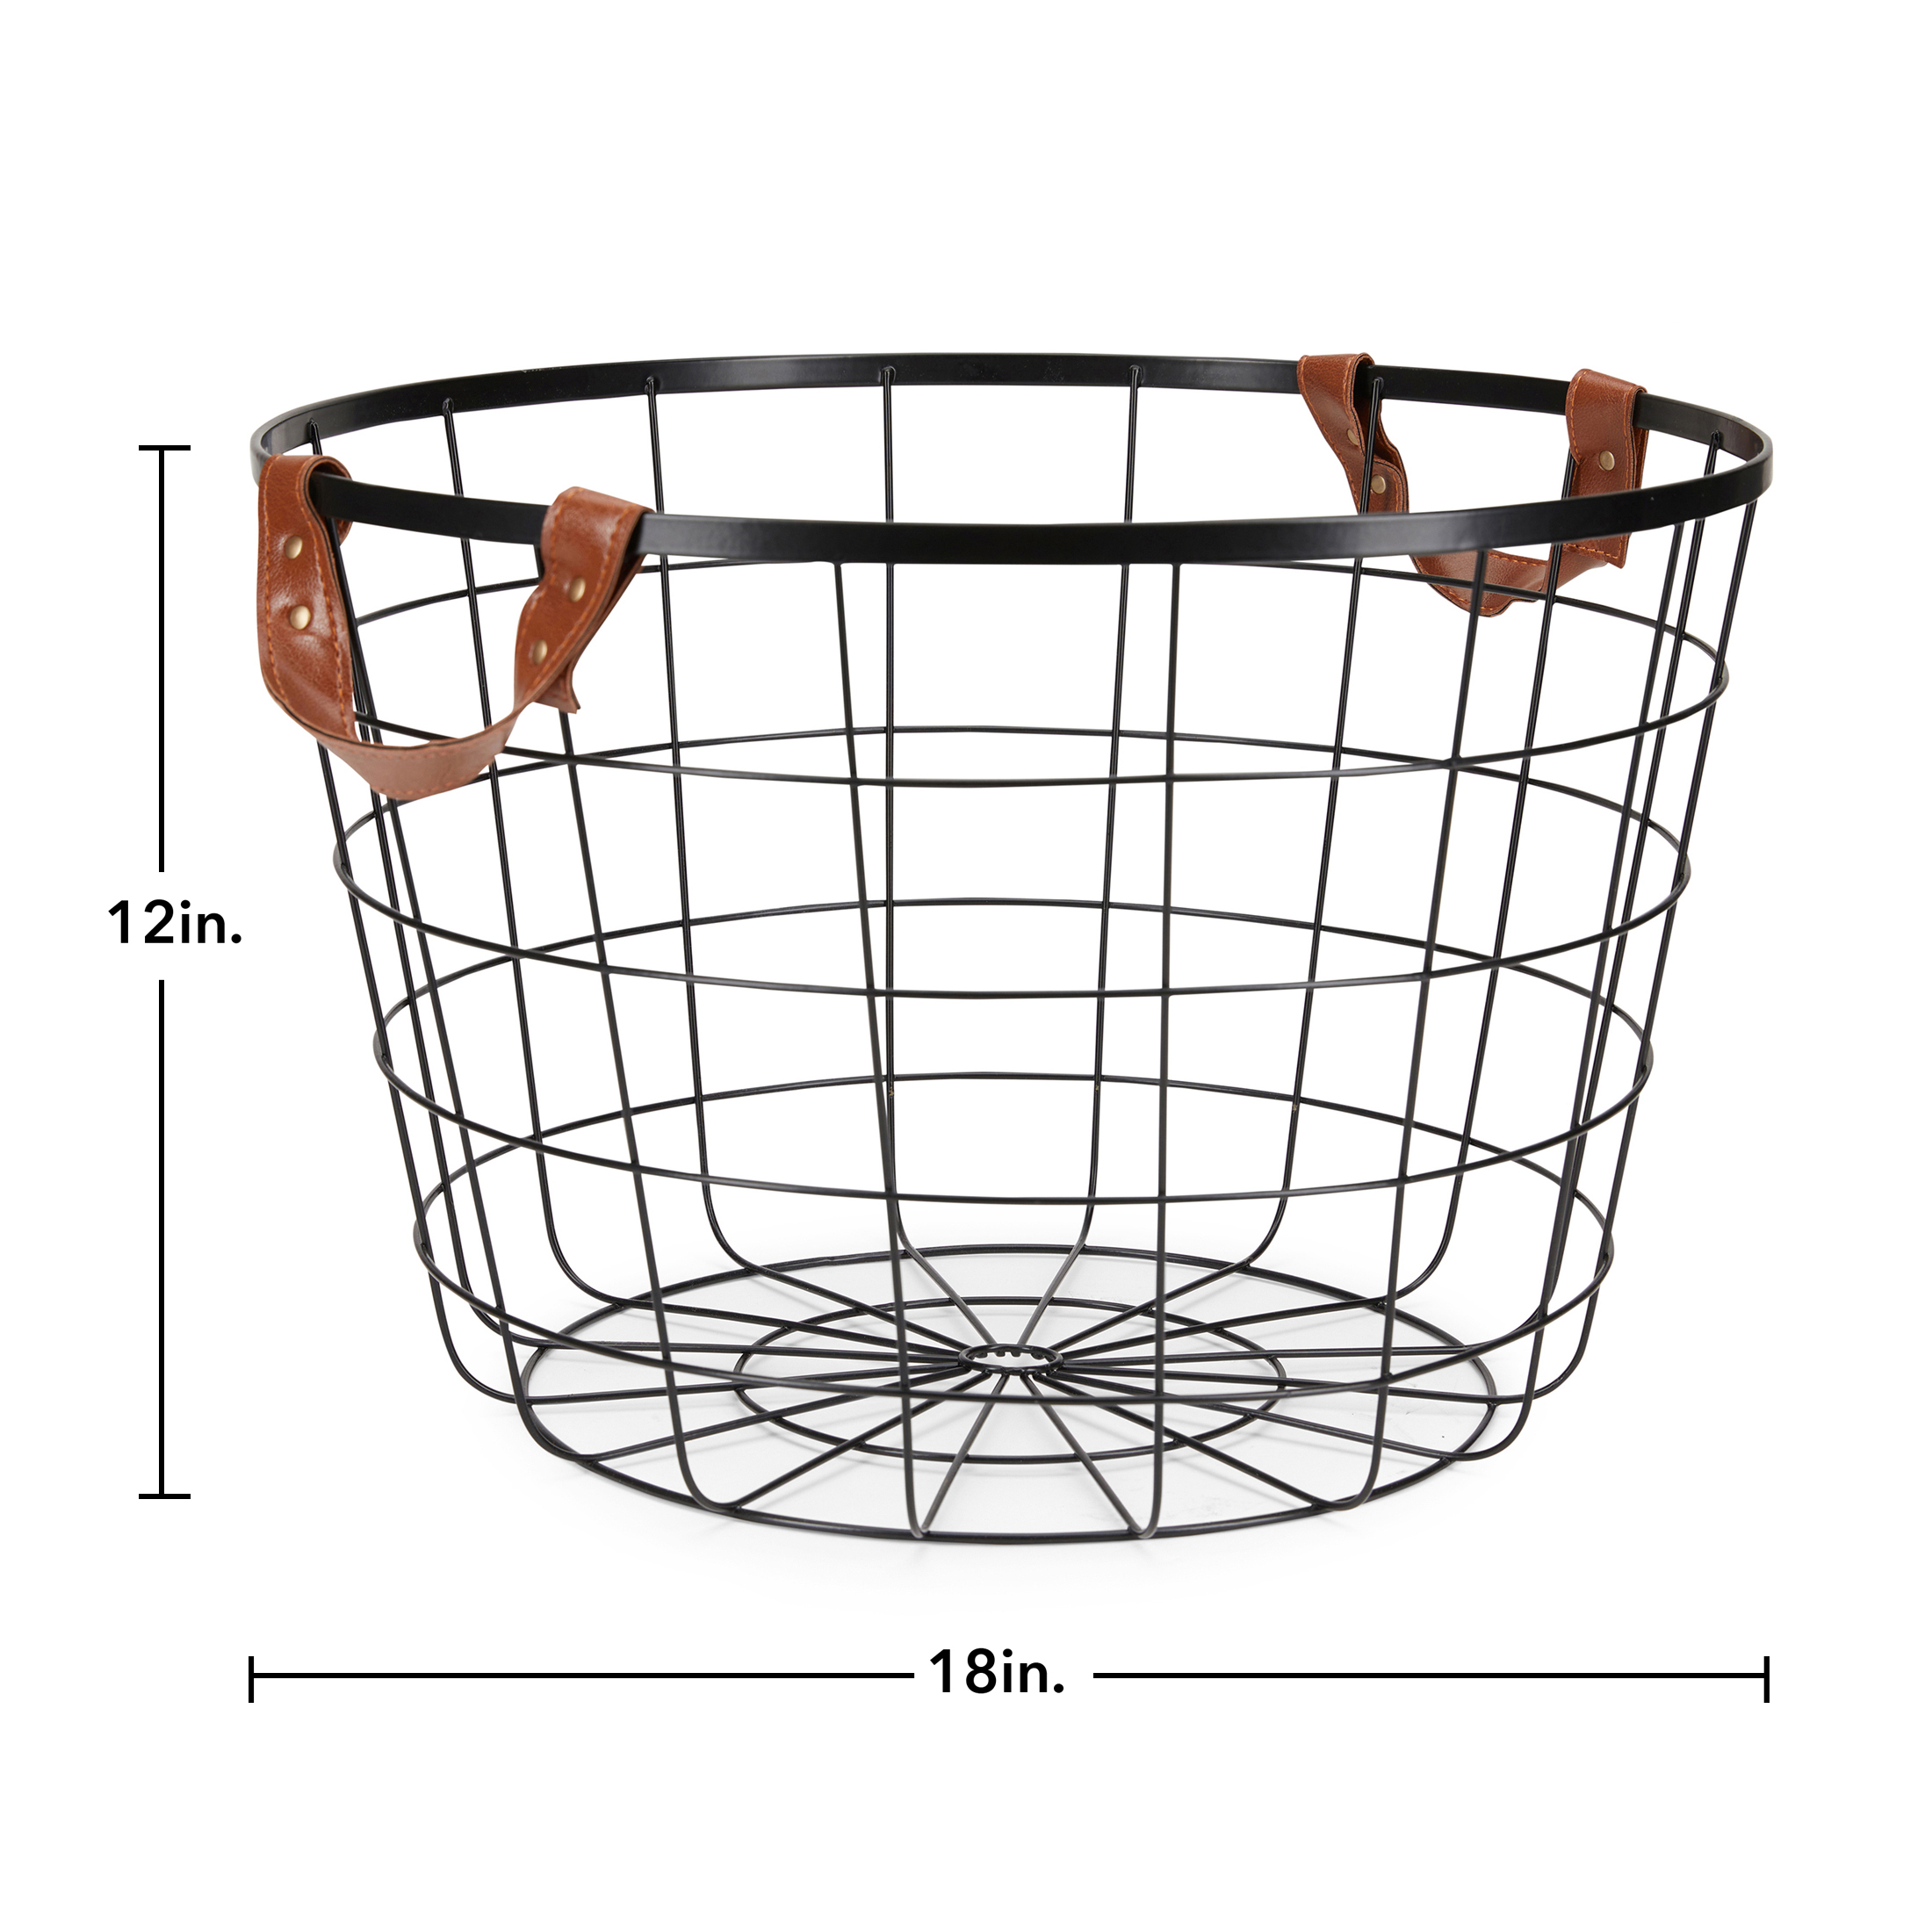 Mainstays Large Round Wire Basket with Handles, Black - image 5 of 6